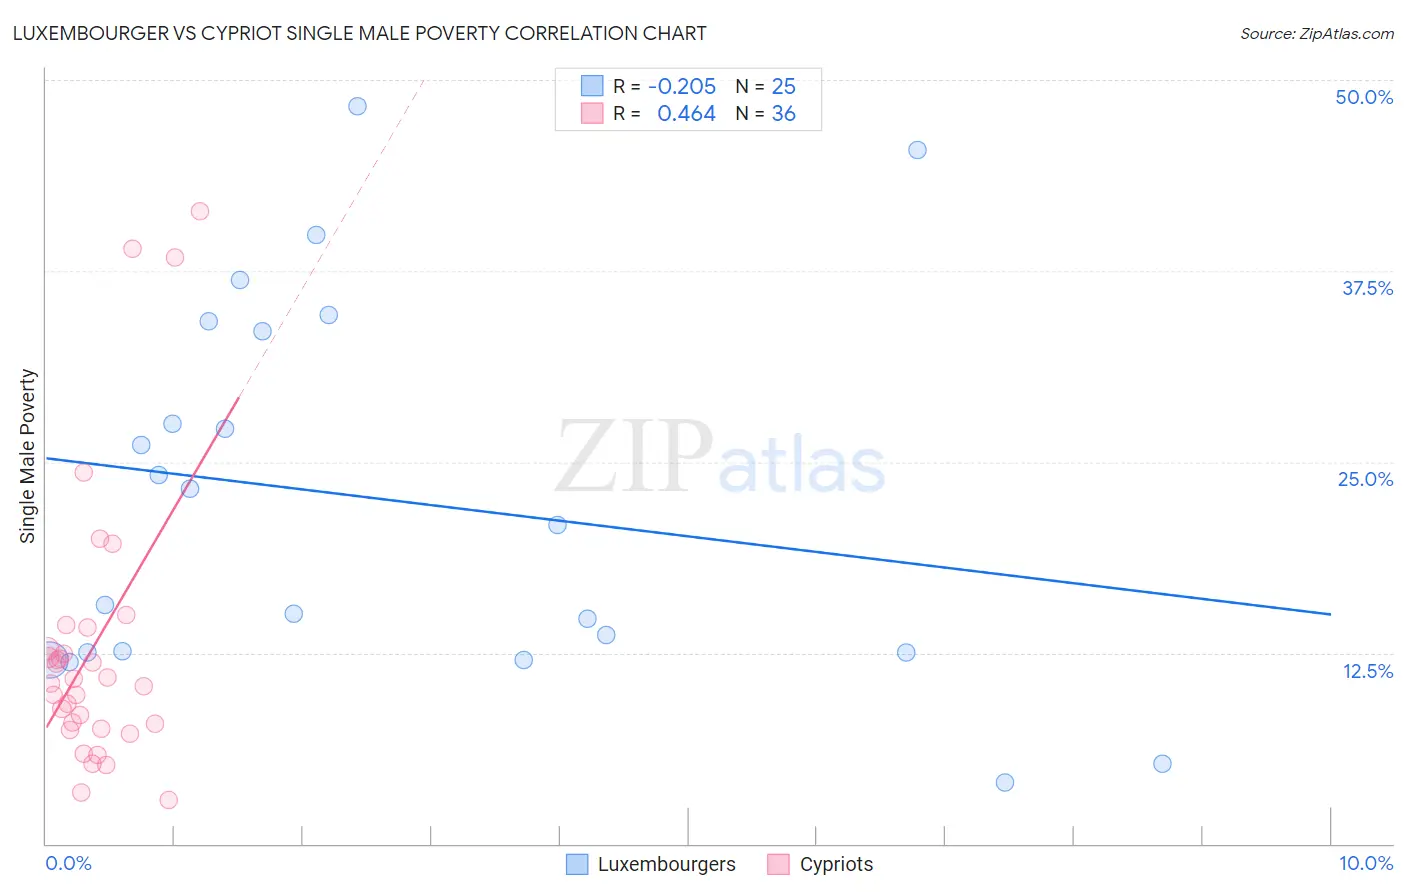 Luxembourger vs Cypriot Single Male Poverty